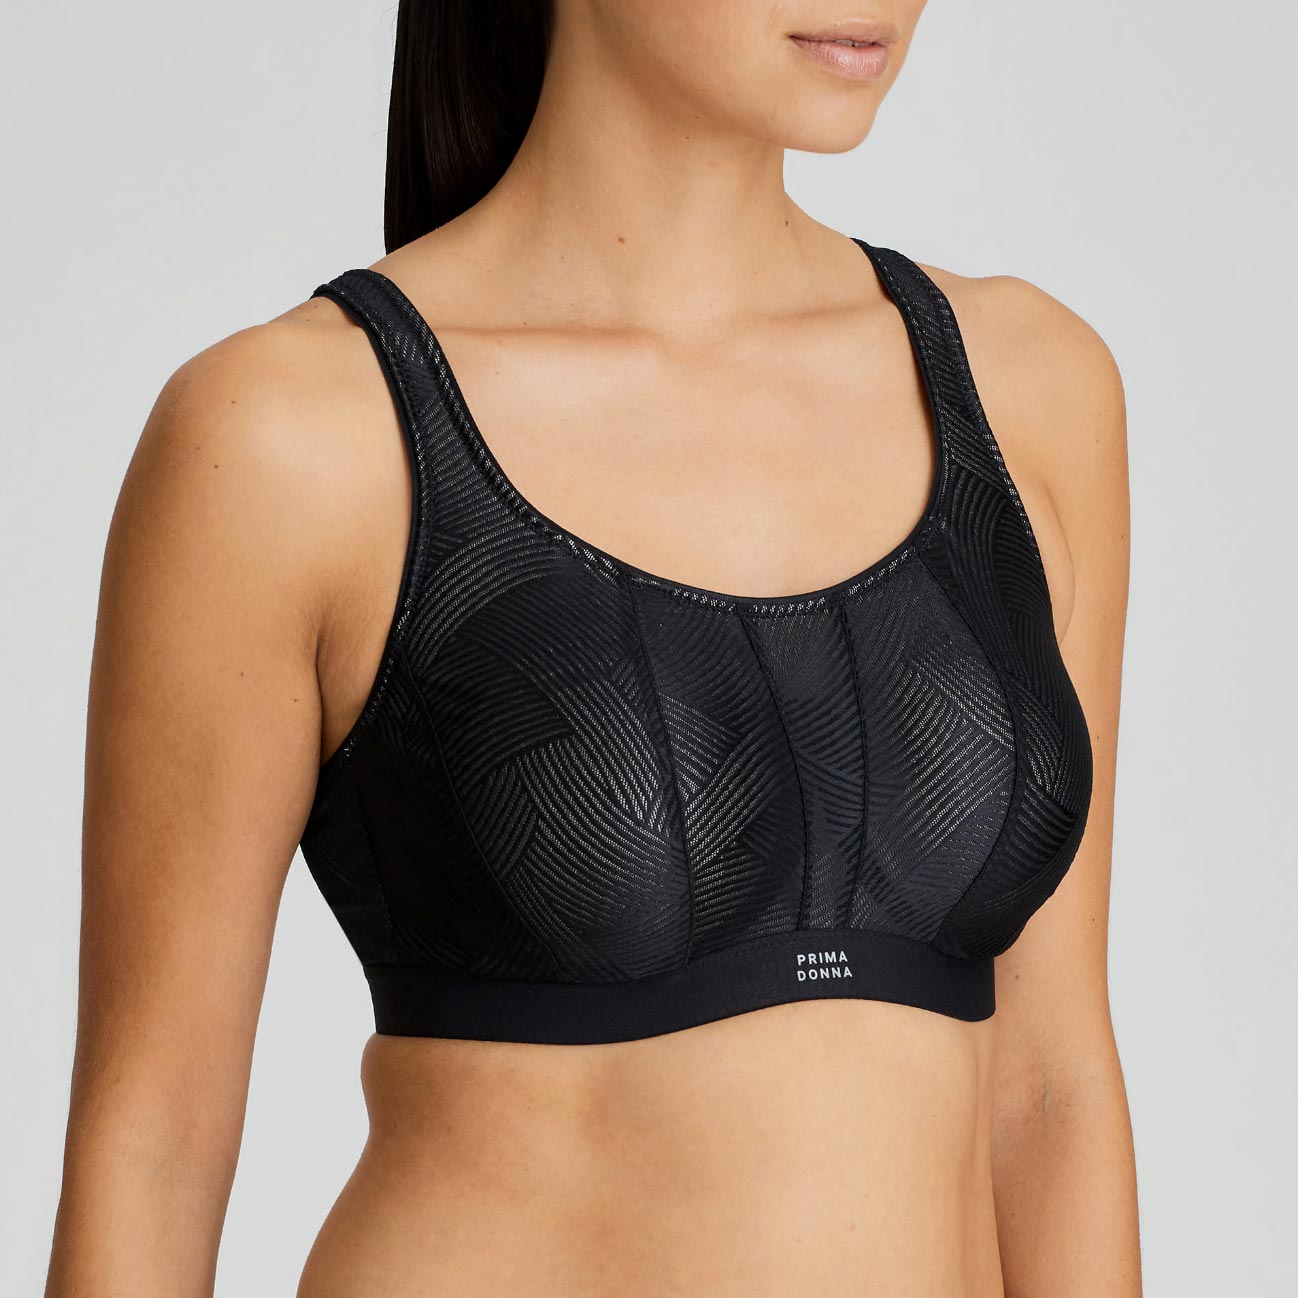 The Game Wired Sports Bra